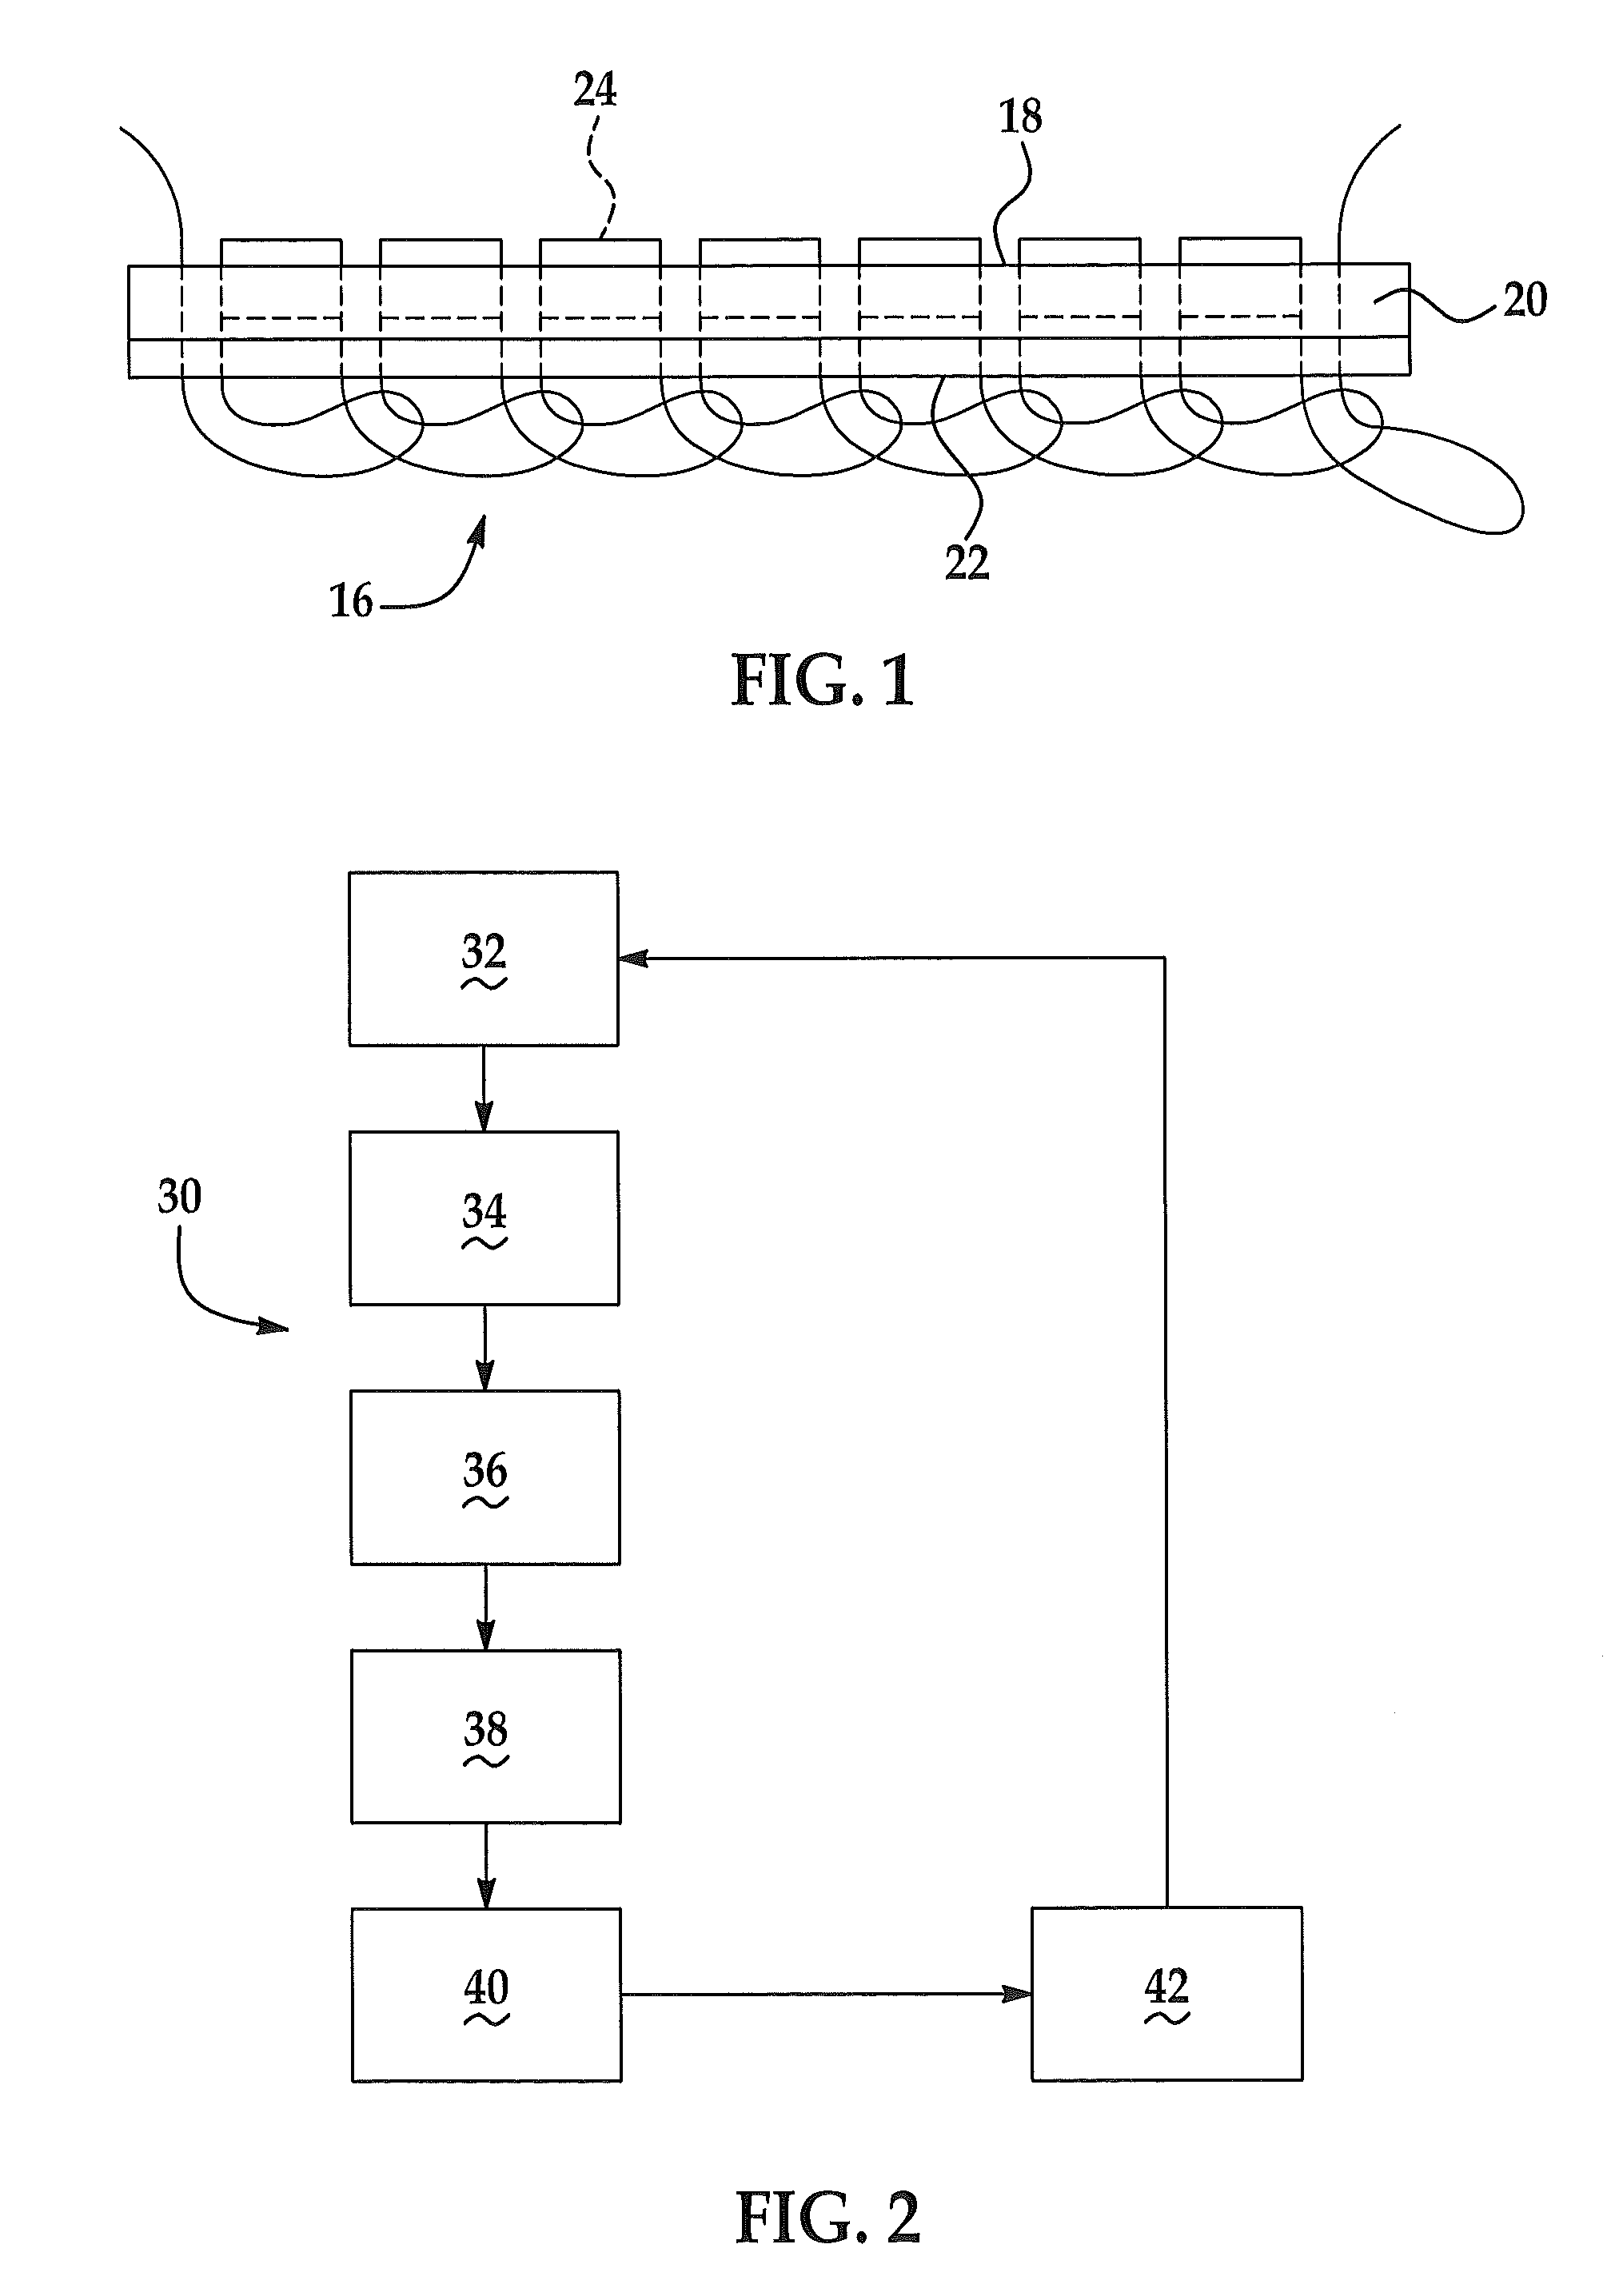 Method for stitching vehicle interior components and components formed from the method